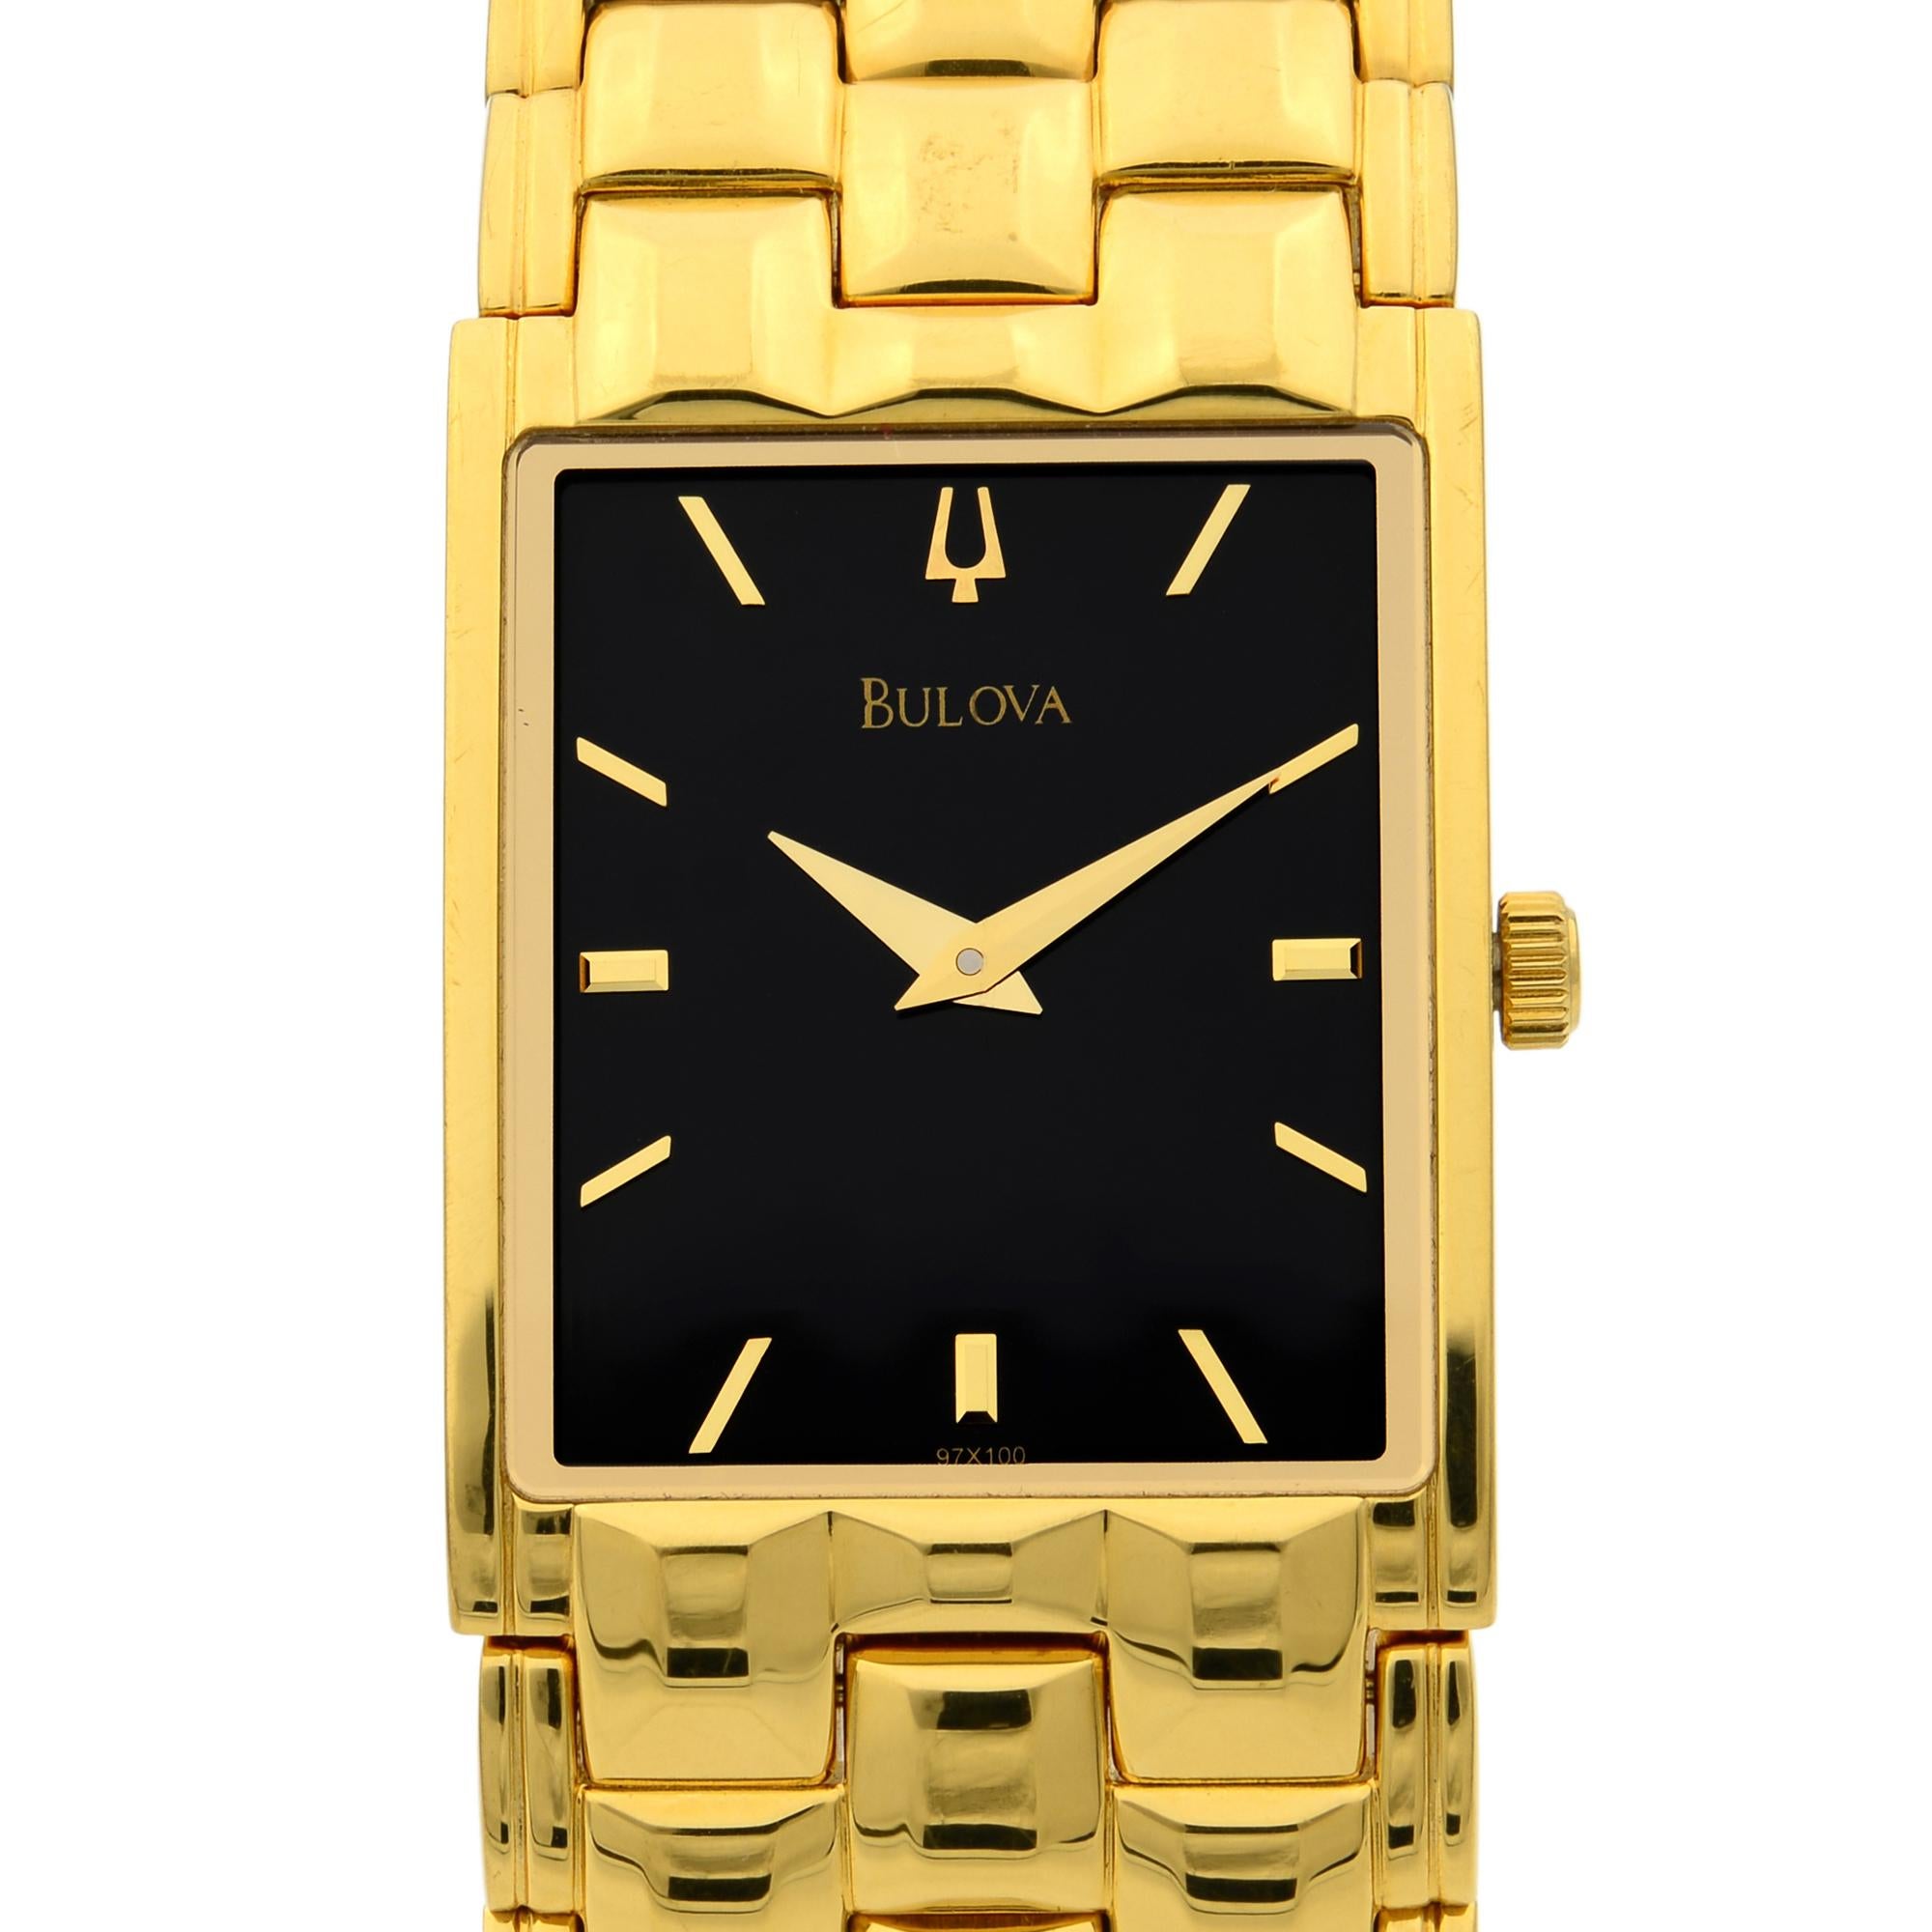 This pre-owned Bulova 97X100 Watch is a beautiful men's timepiece that is powered by quartz (battery) movement which is cased in a stainless steel case. It has a rectangle shape face and has hand sticks style markers. It is completed with a